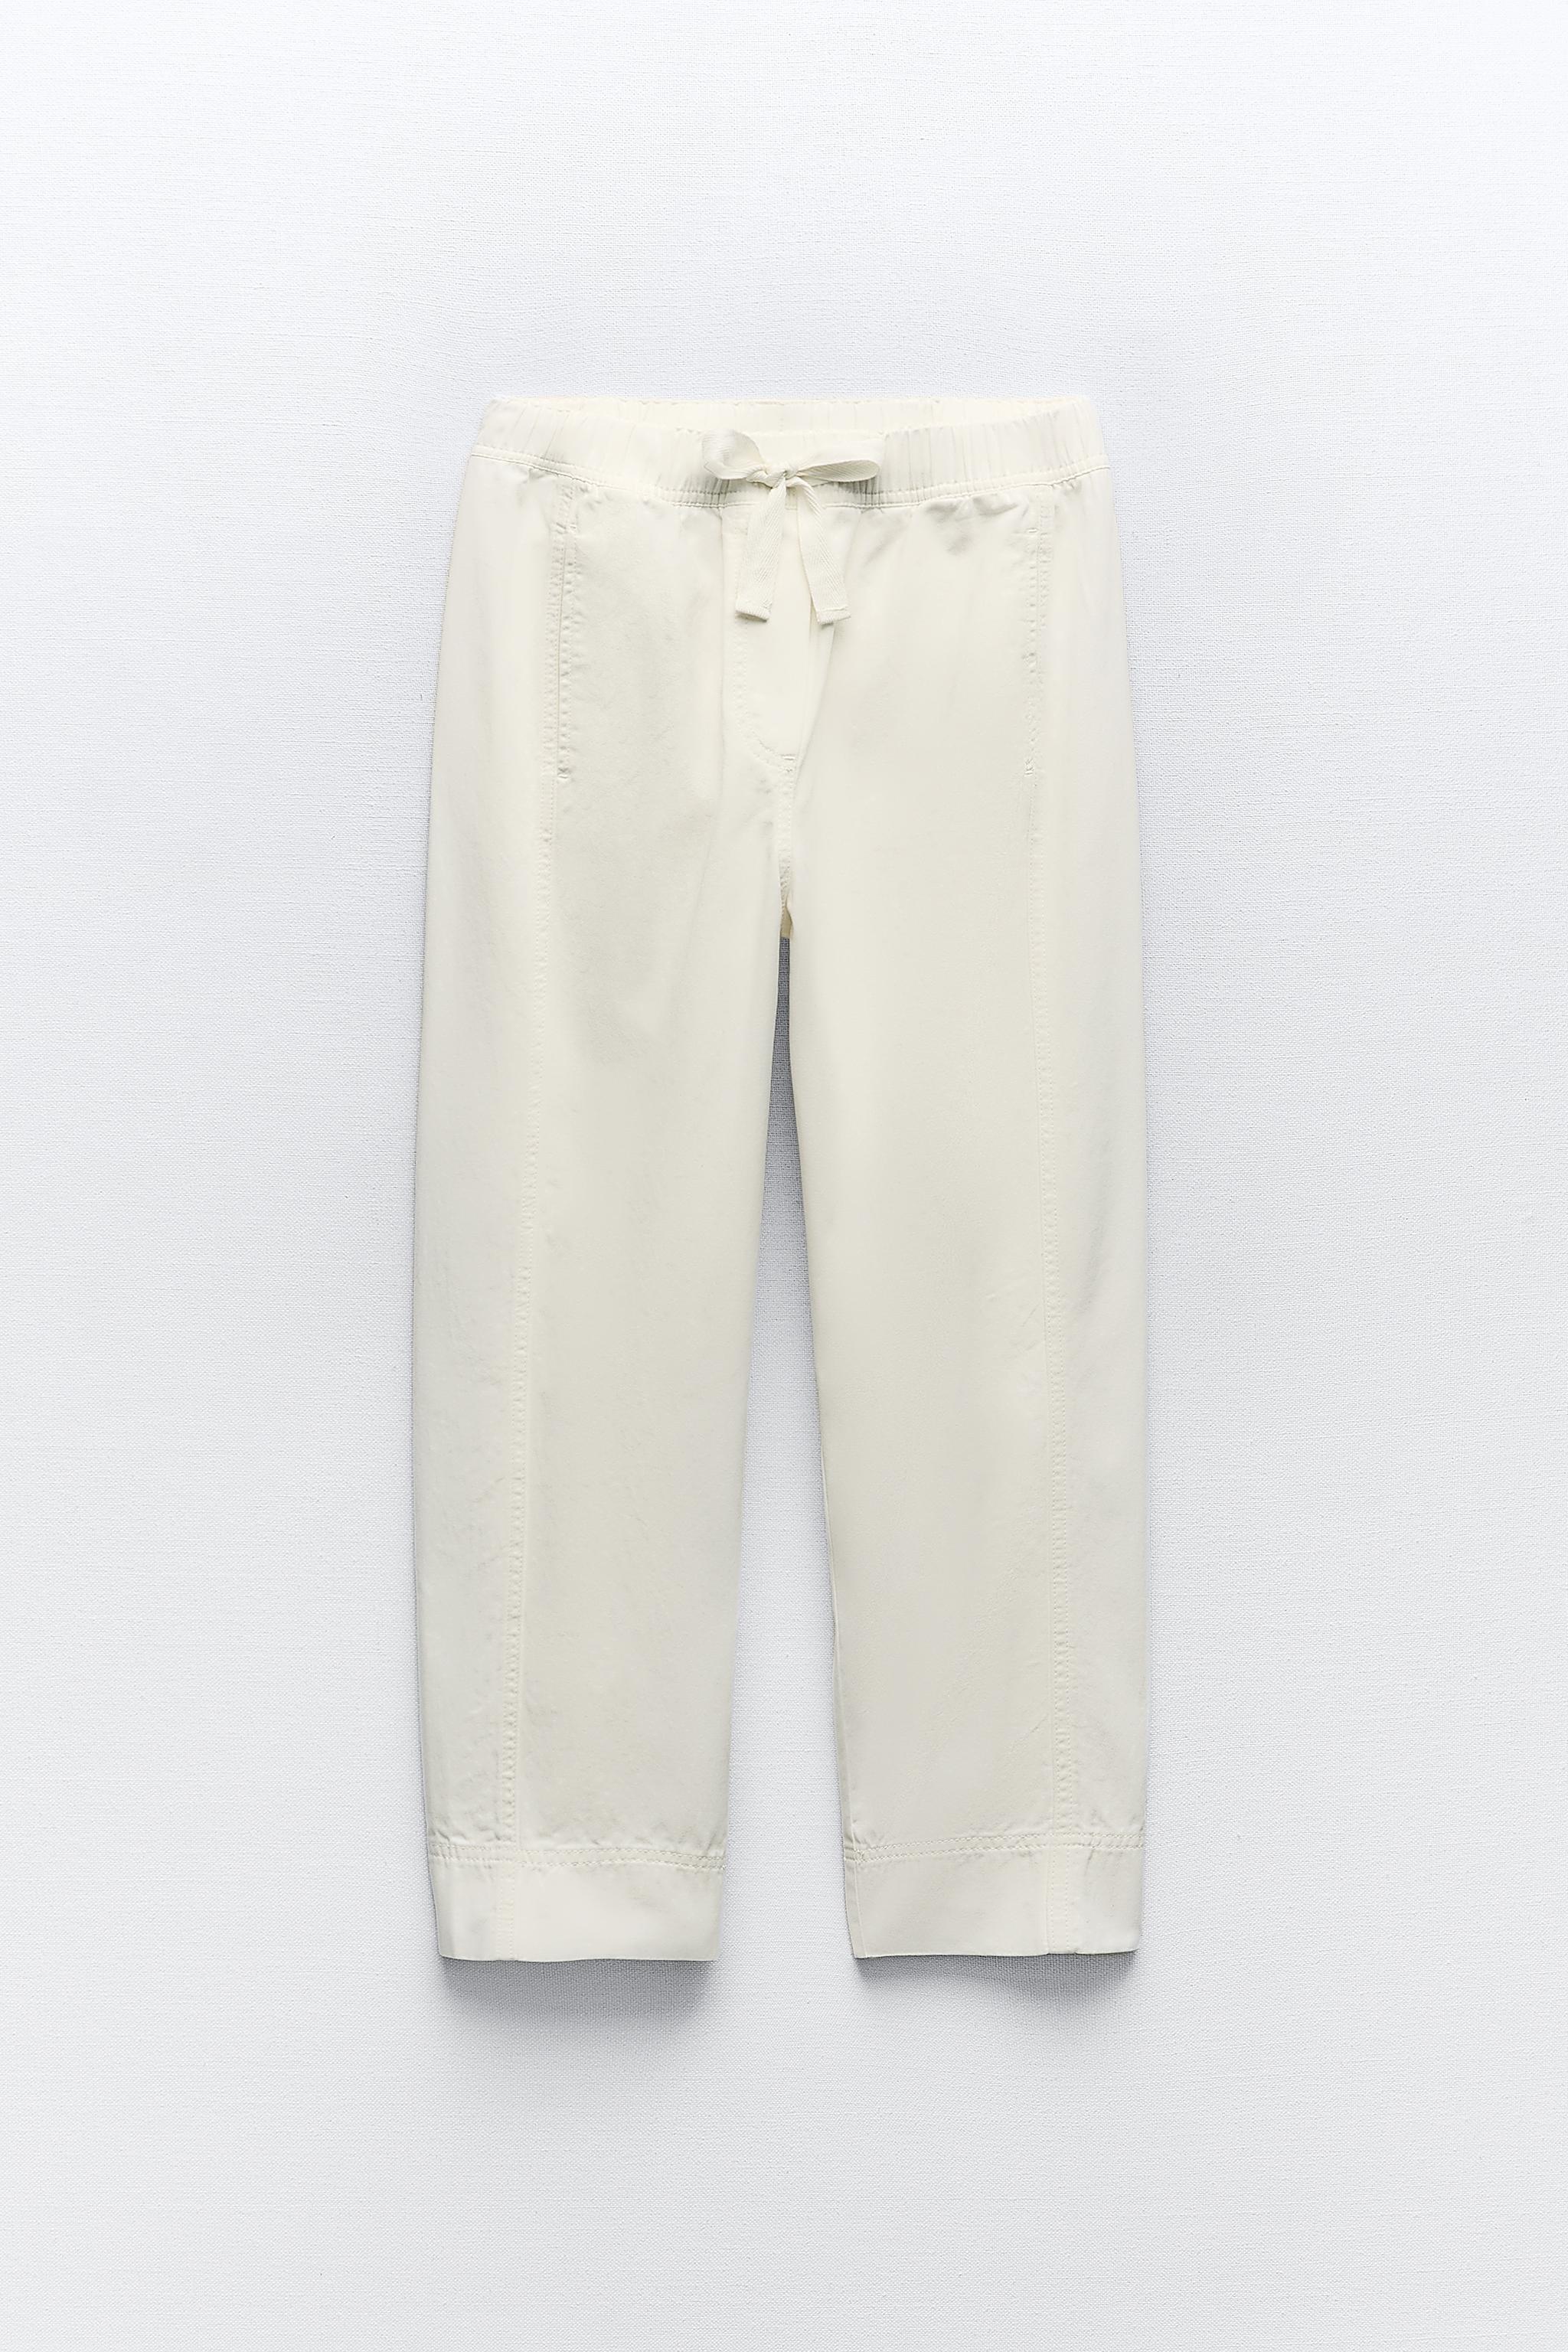 NWT. Zara Oyster White Asymmetric Trousers Size M.  Clothes design, High  waisted trousers, White trousers